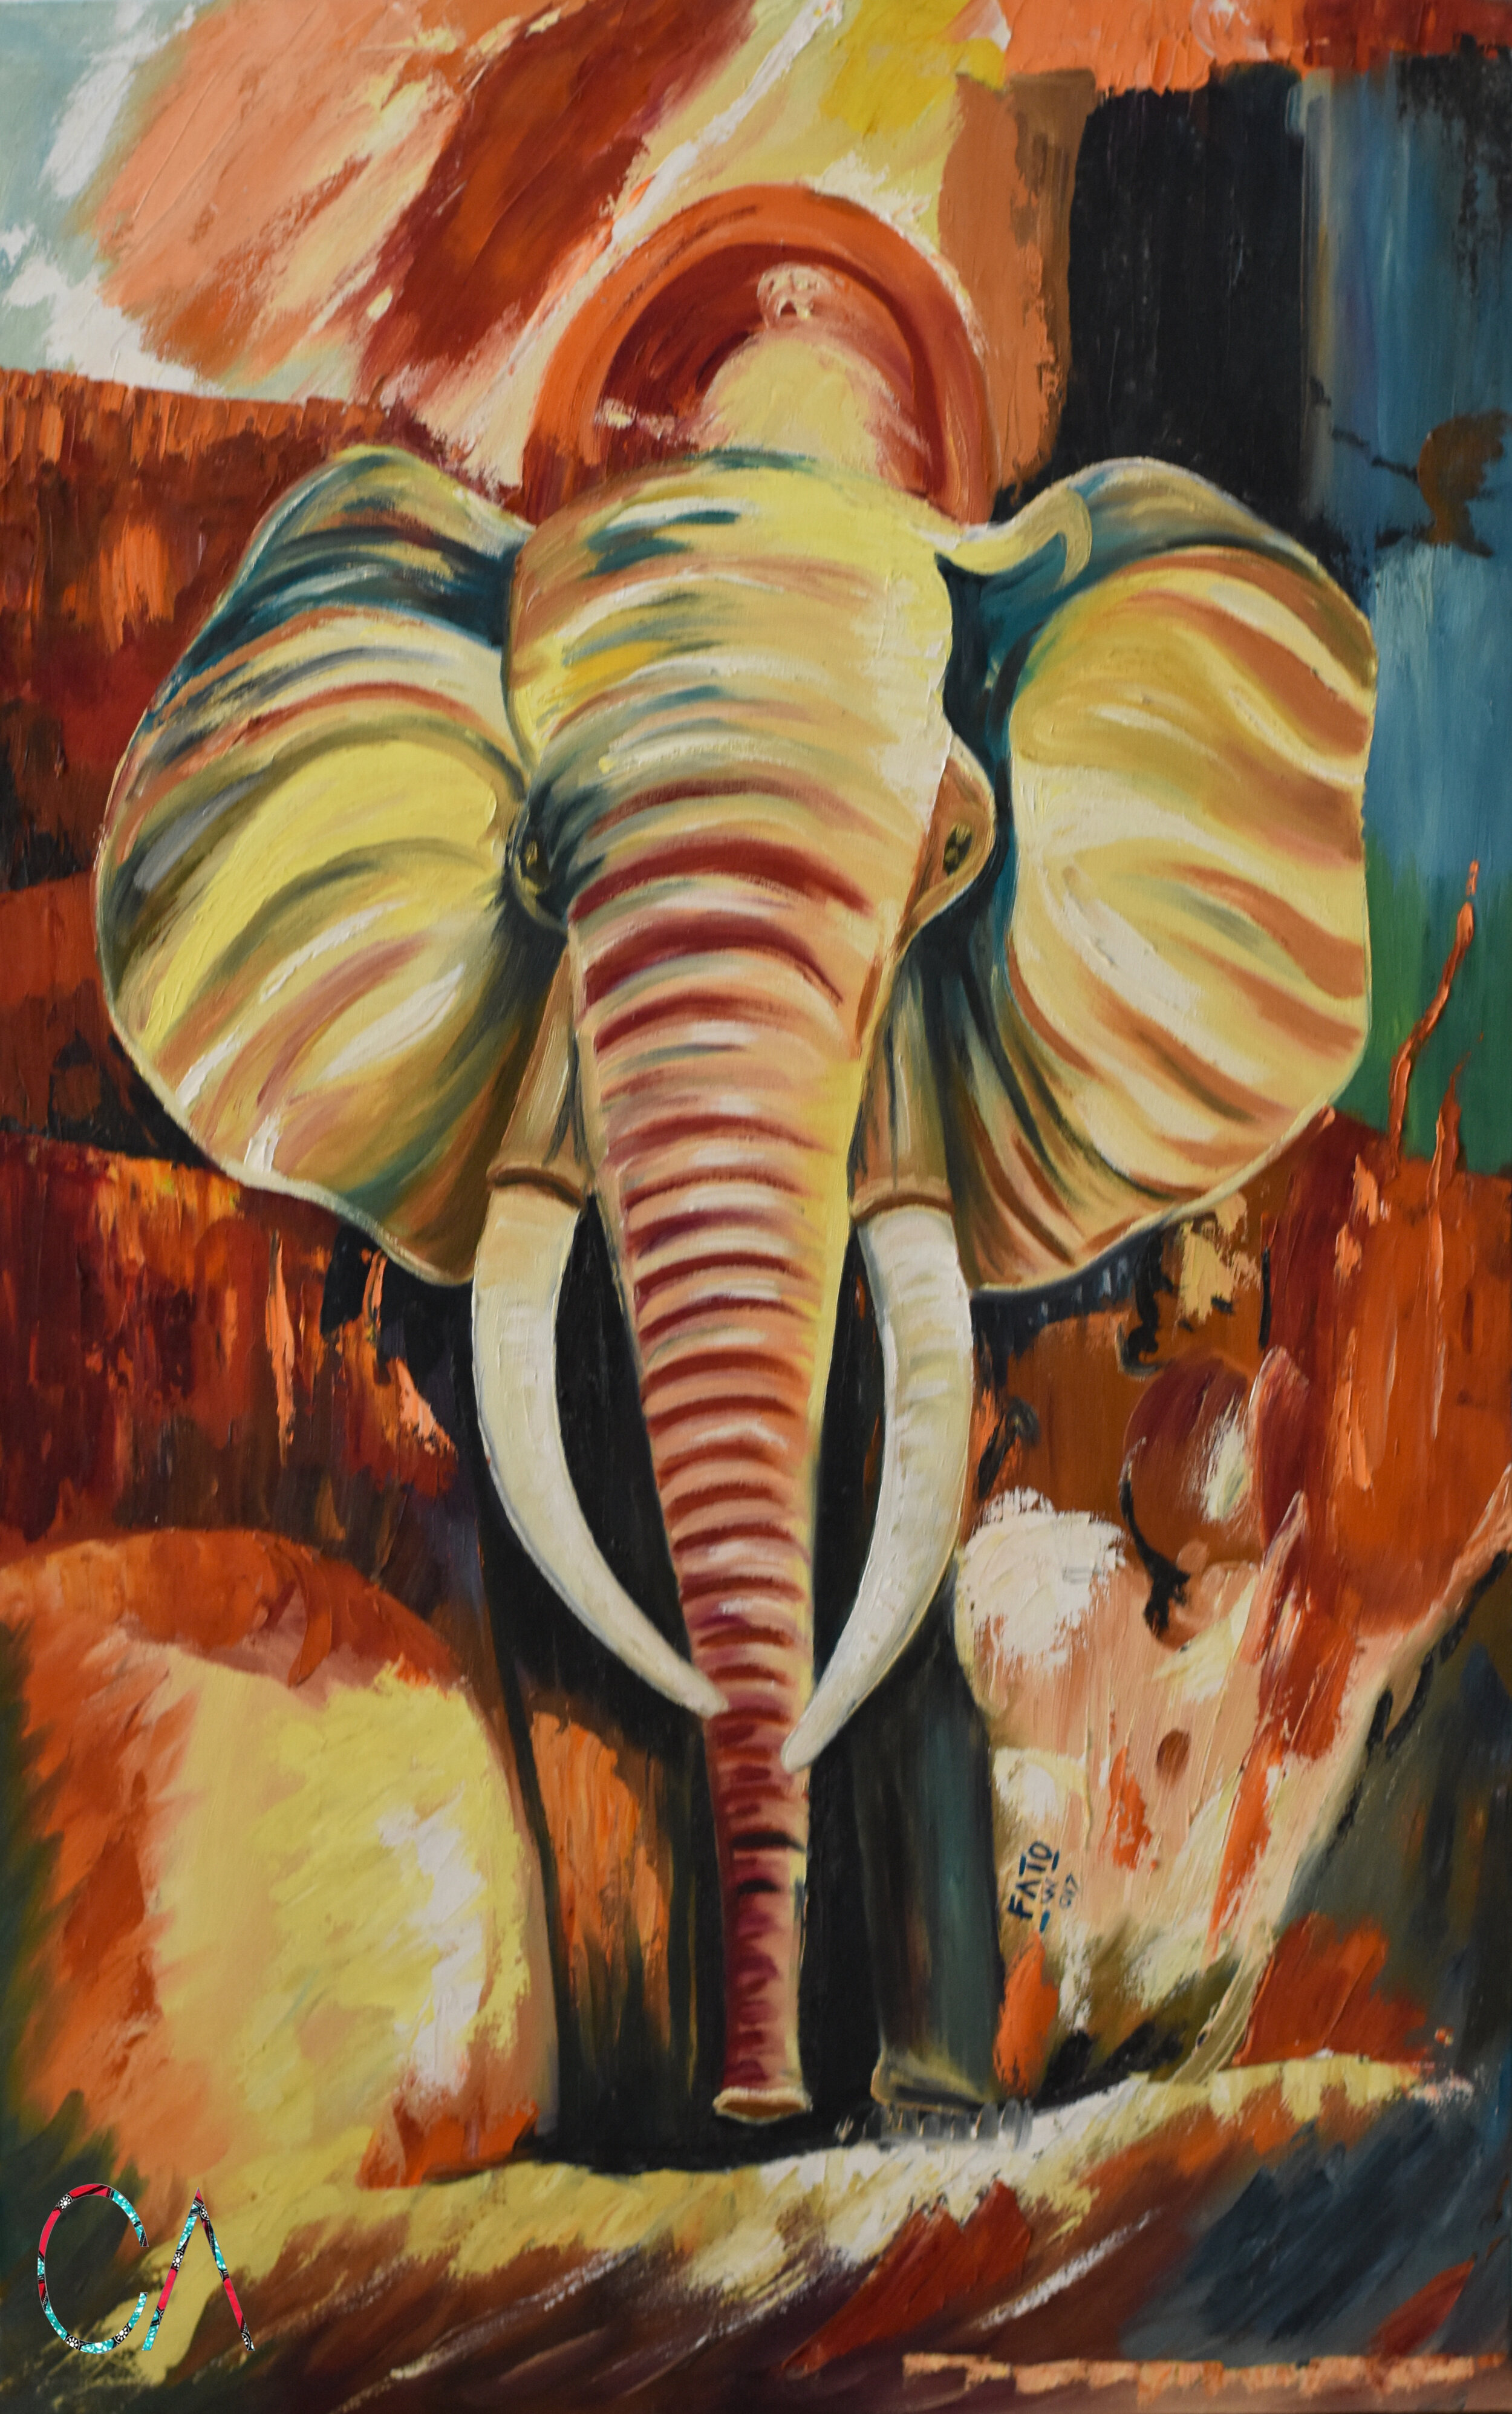 ELEPHANT IN ABSTRACT, 37x23 inches $300